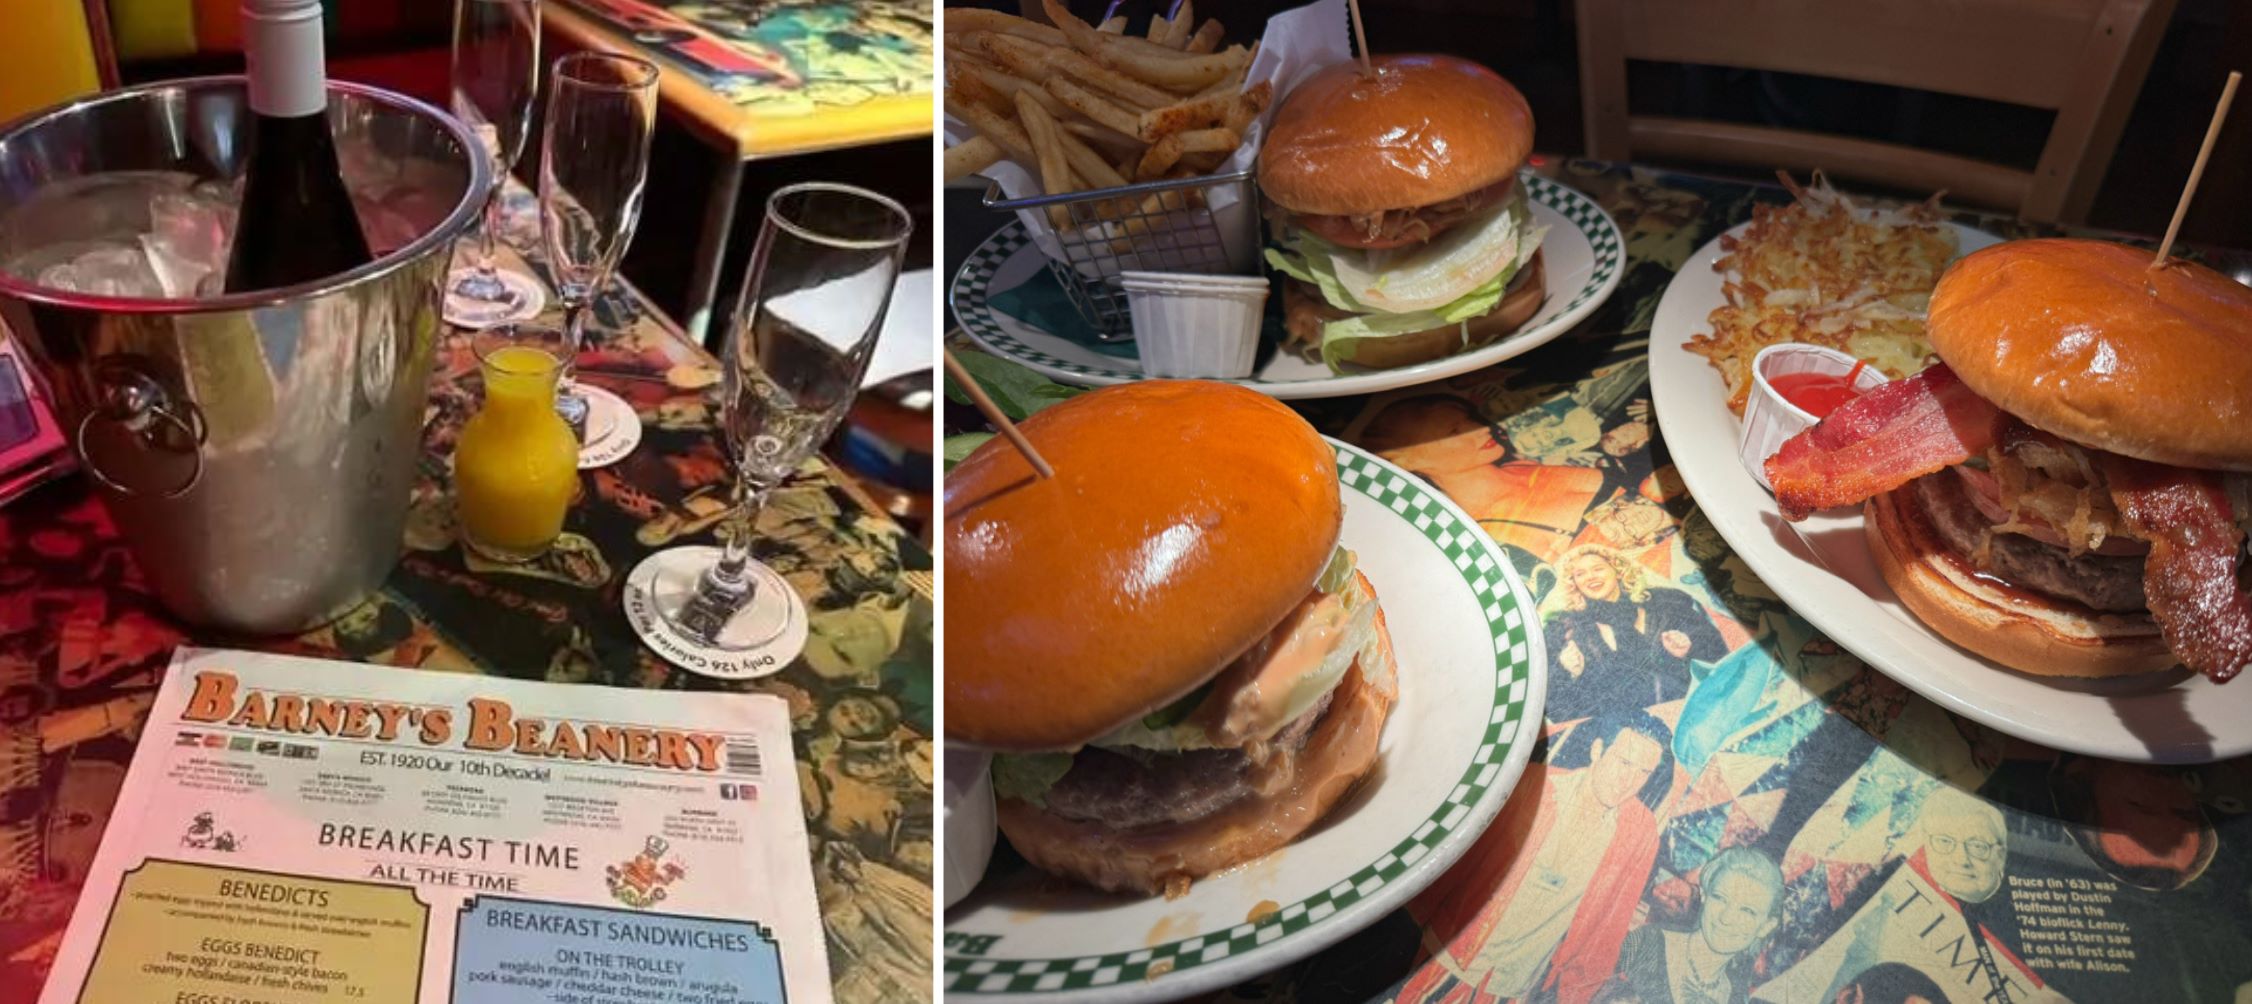 Barney’s Beanery Brings Famous Cheese Stuffed Juicy Lucy Burgers to Los Angeles